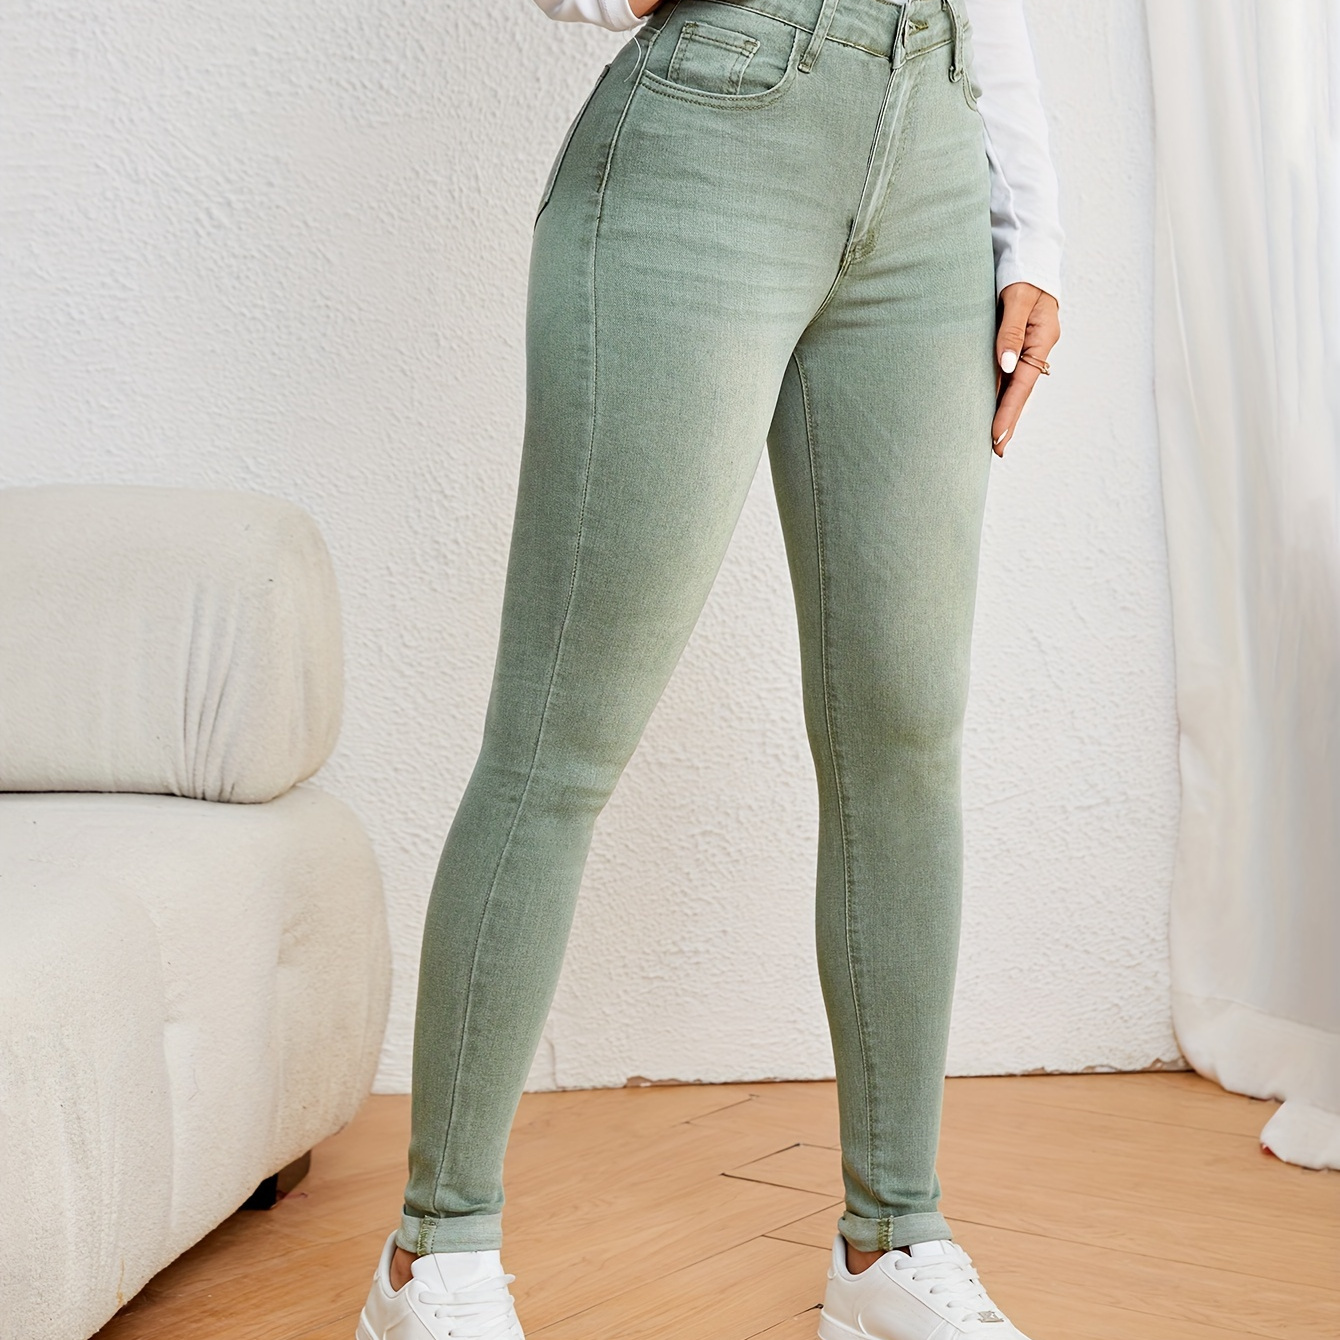 

Women's Slim Fit High-waisted Jeans, Casual Style Stretchy Denim, Skinny Leg Pants, Plain Olive Green, Fashionable Daily Wear - Perfect For Fall & Winter